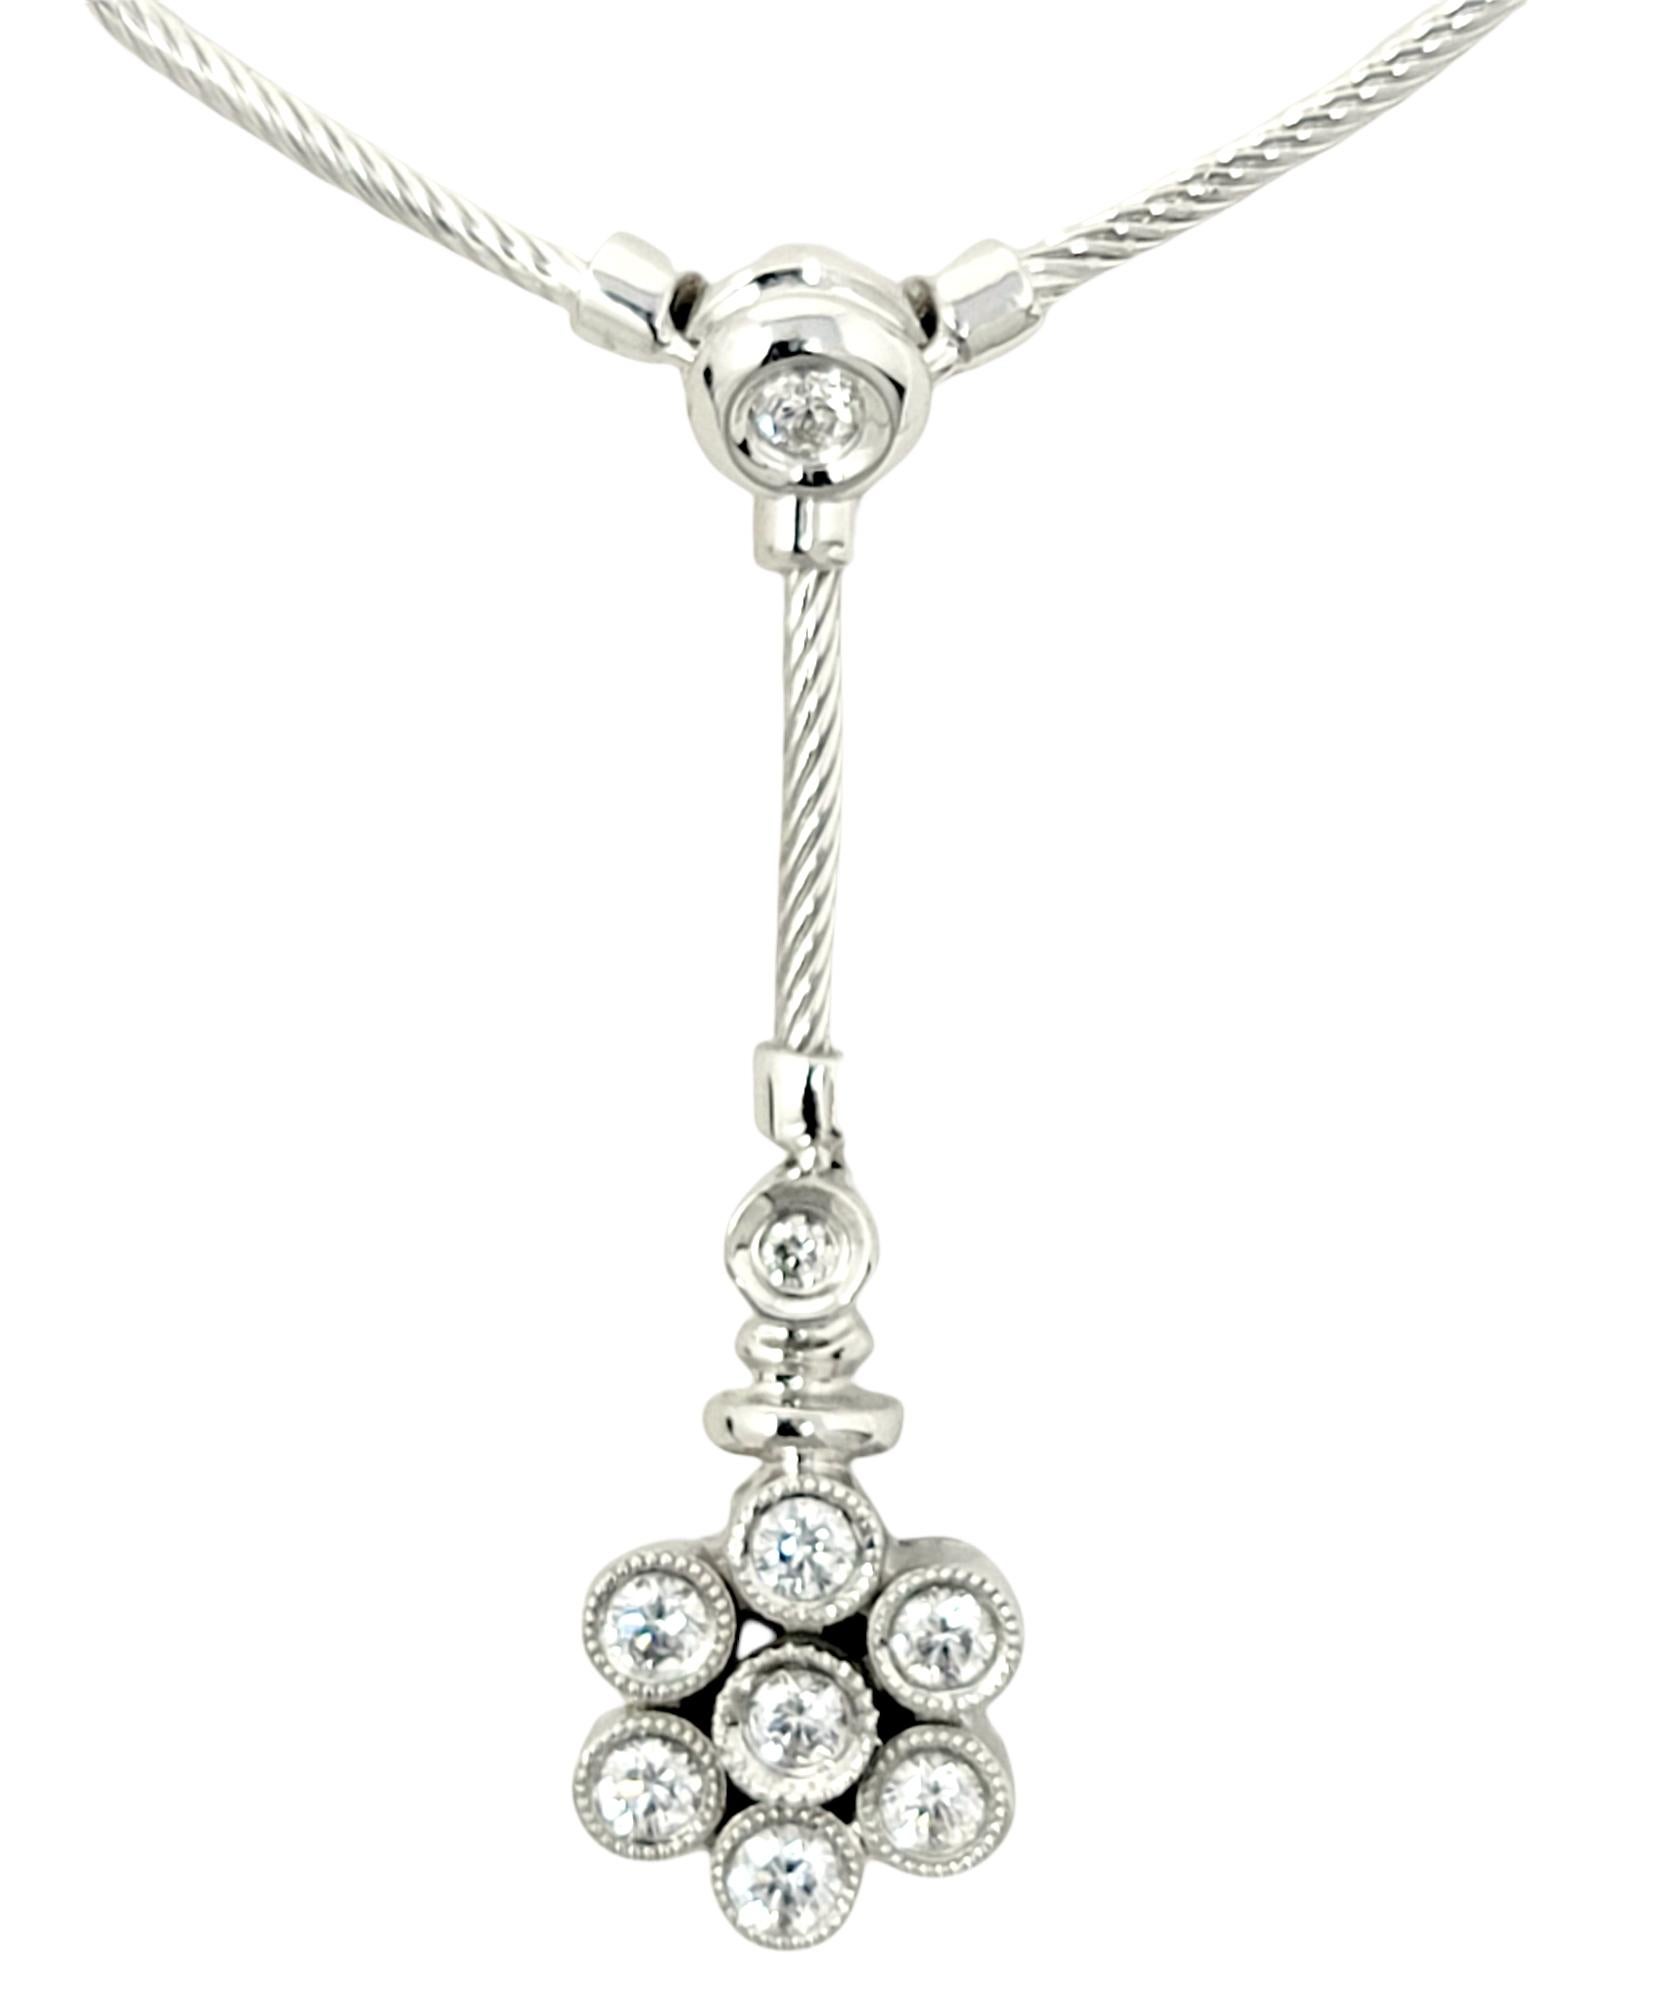 Lovely feminine diamond and cable station necklace by Philippe Charriol with a gorgeous diamond embellished floral drop charm. 

Metal: 18 Karat White Gold
Natural Diamond: .41 carats
Diamond cut: Round Brilliant
Diamond color: G-H
Diamond clarity: